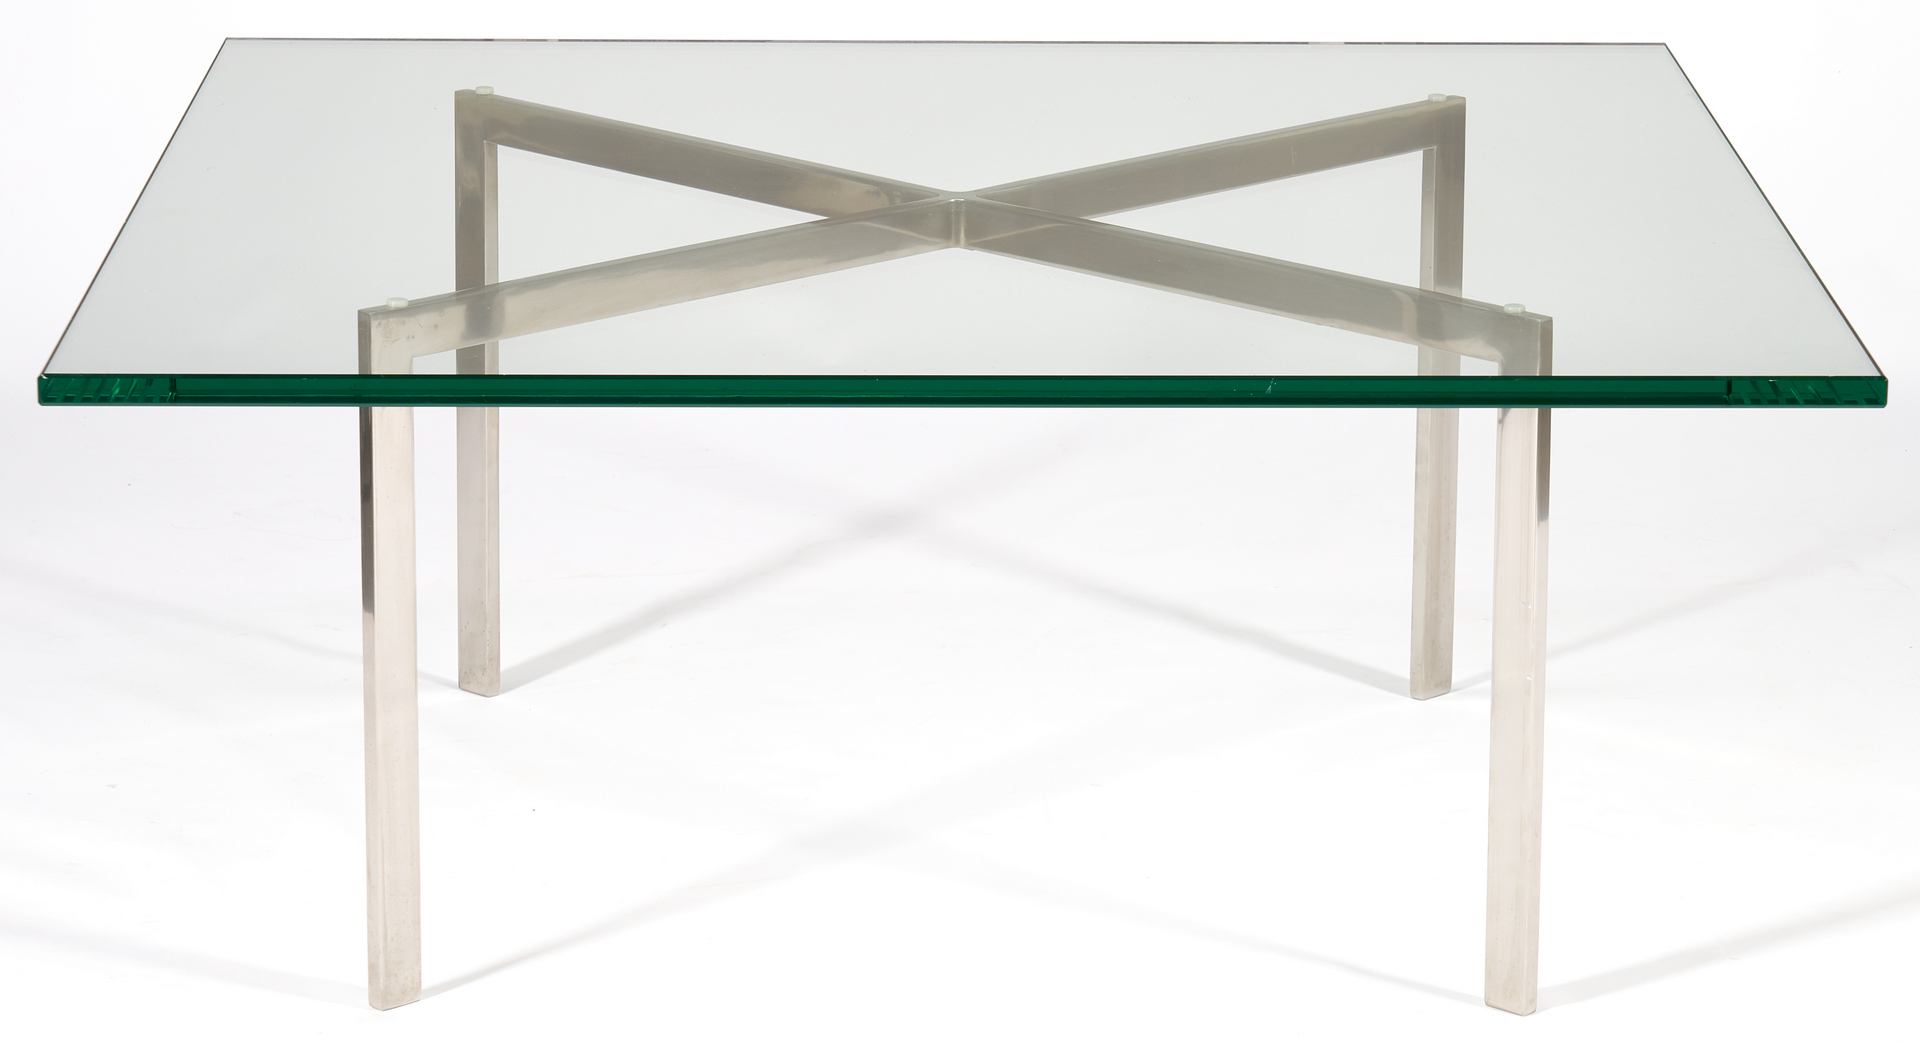 Lot 243: Miles van der Rohe Knoll Barcelona Glass Coffee Table, 2 of 2